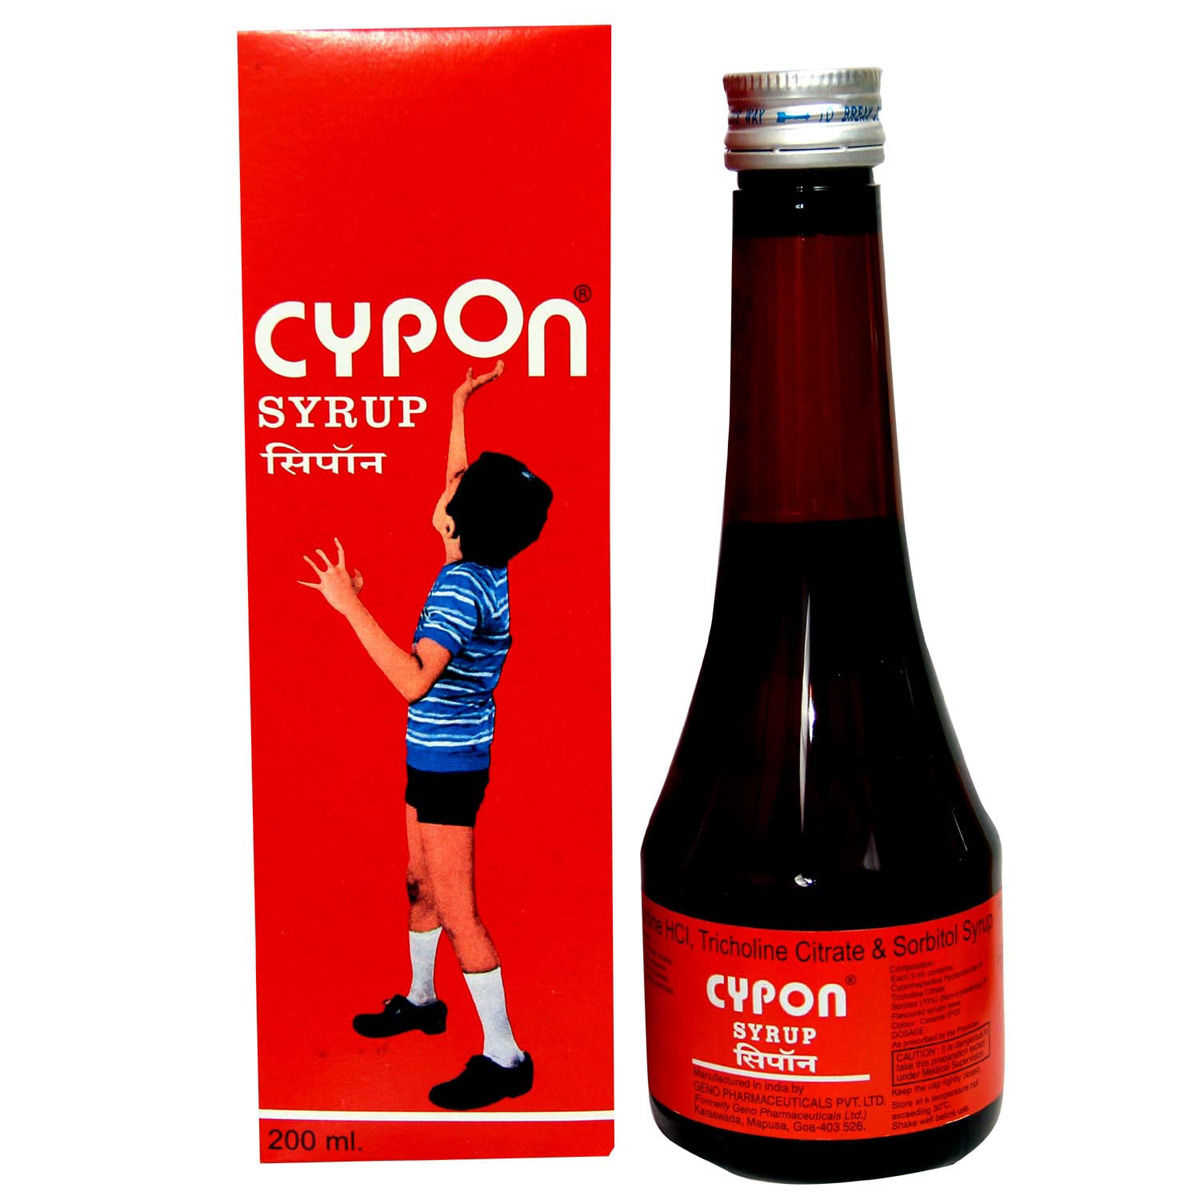 Cypon Syrup 200 ml Price, Uses, Side Effects, Composition - Apollo Pharmacy...